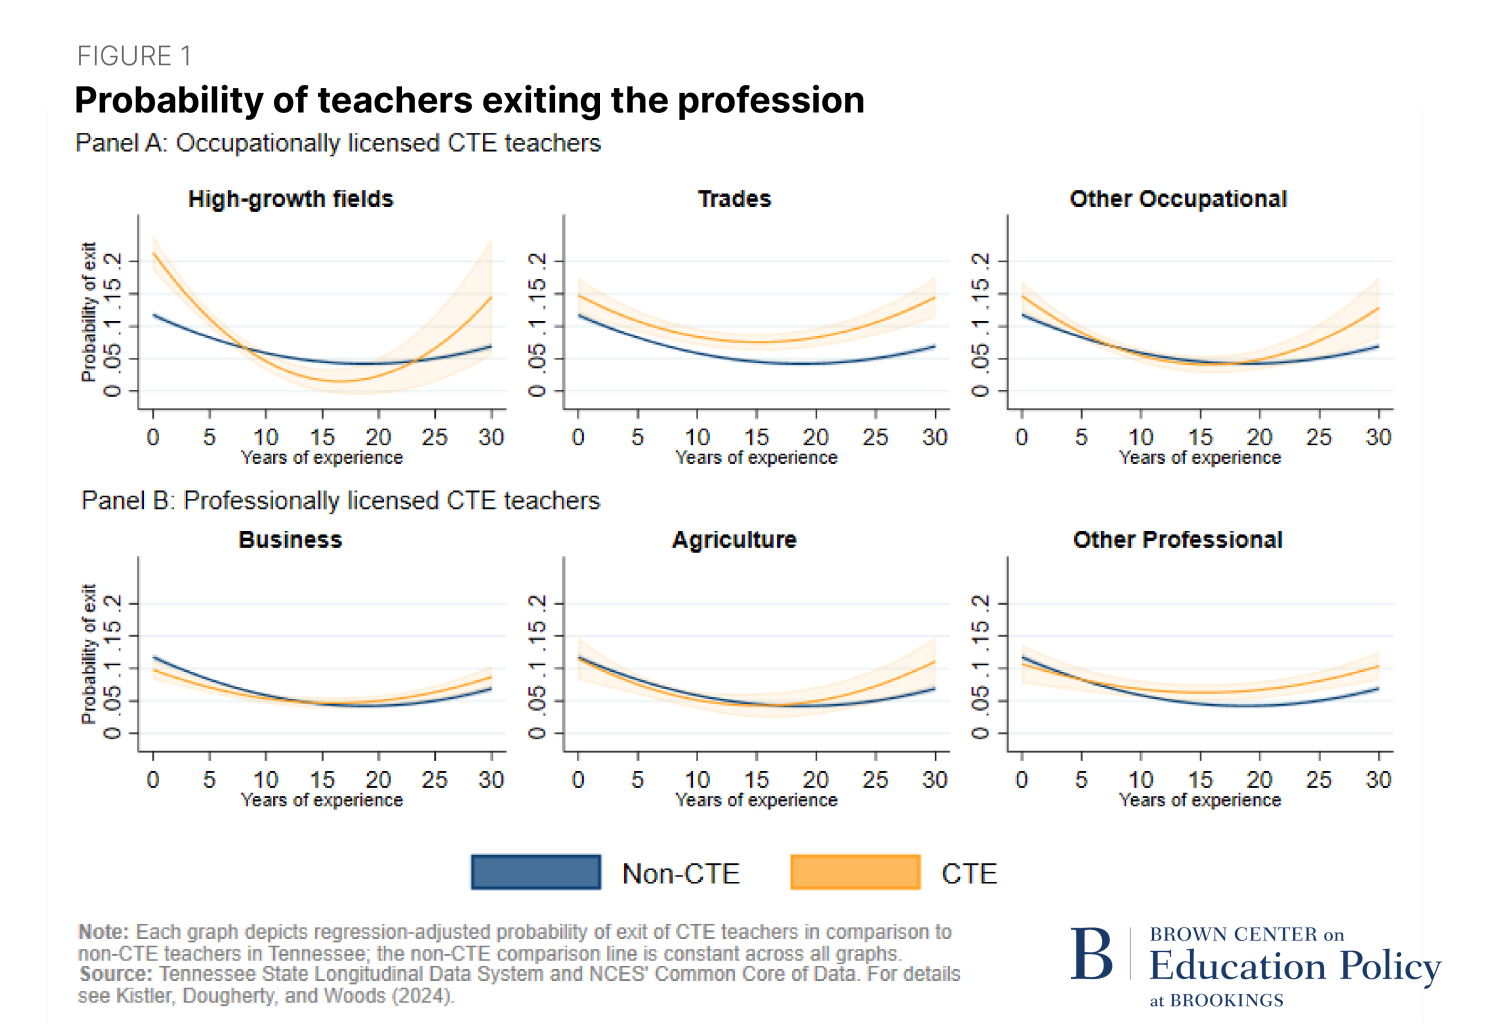 Figure depicting the probability of teachers leaving the profession